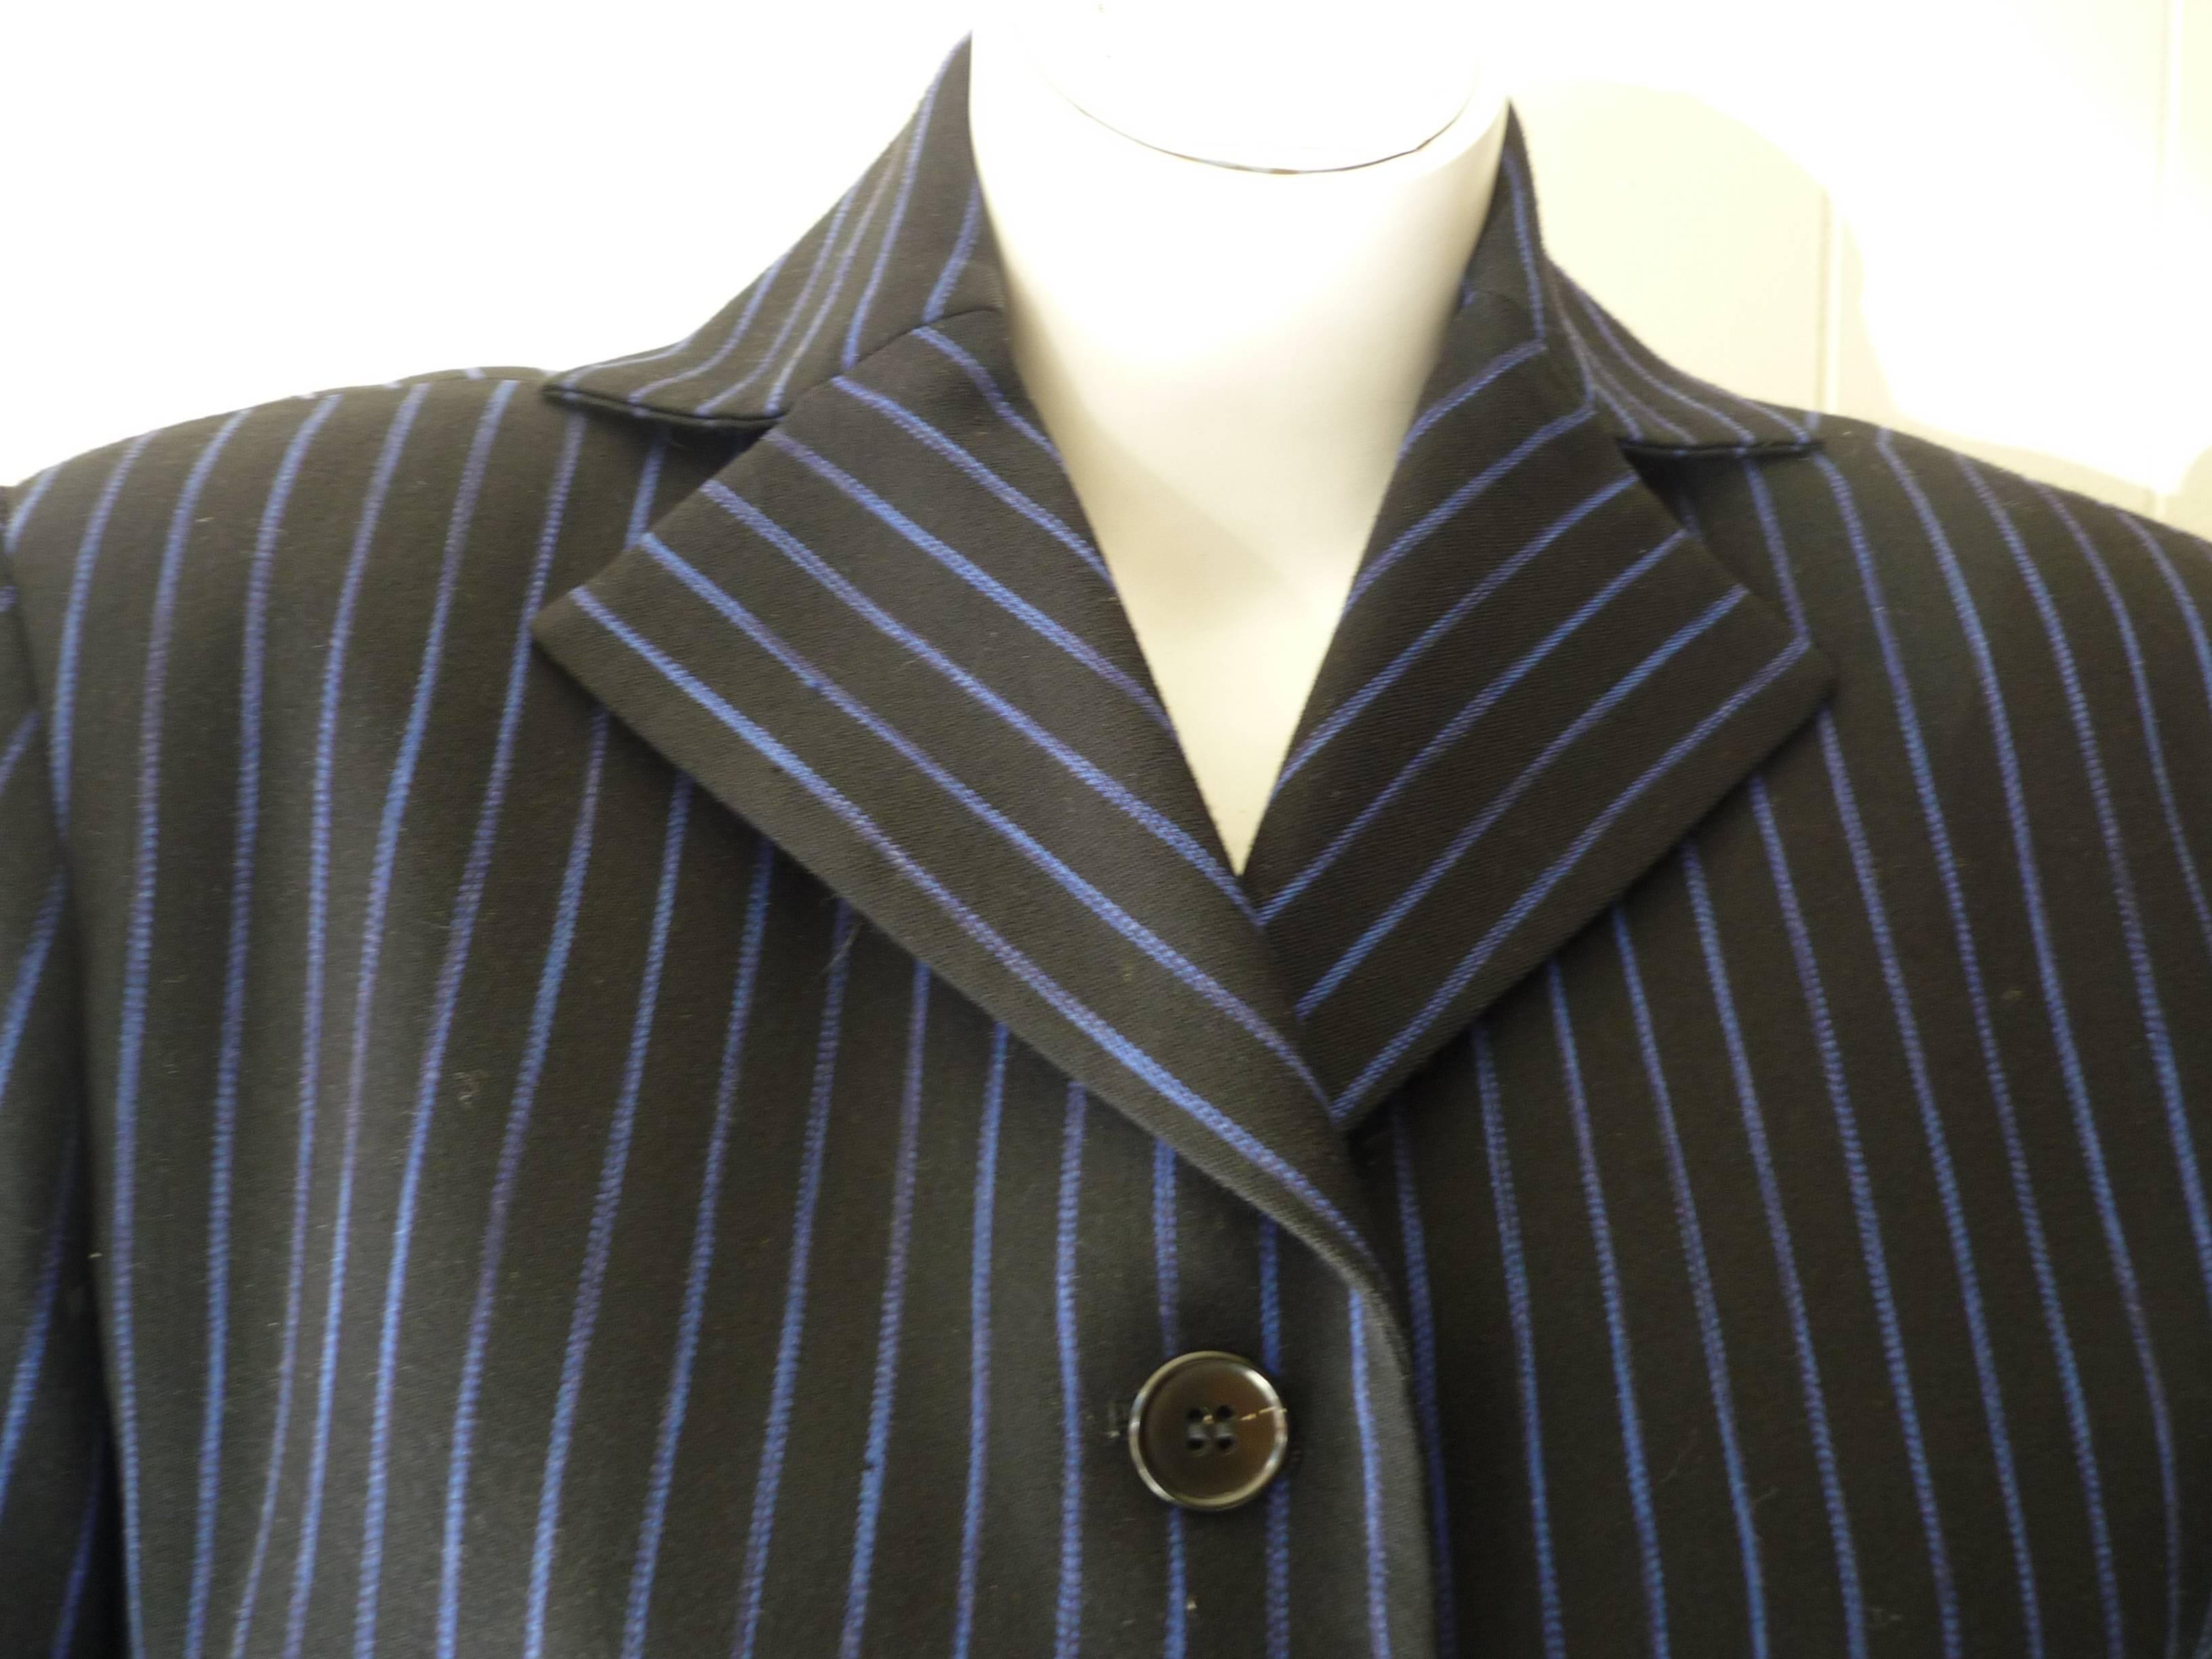 Black and blue pinstripe pant suit with wide pants, high waist and slight dropped crotch. The jacket is nicely tailored wih slit pockets; three button closure; a half belt and there a nice curved hem in the front.

There are a couple of small